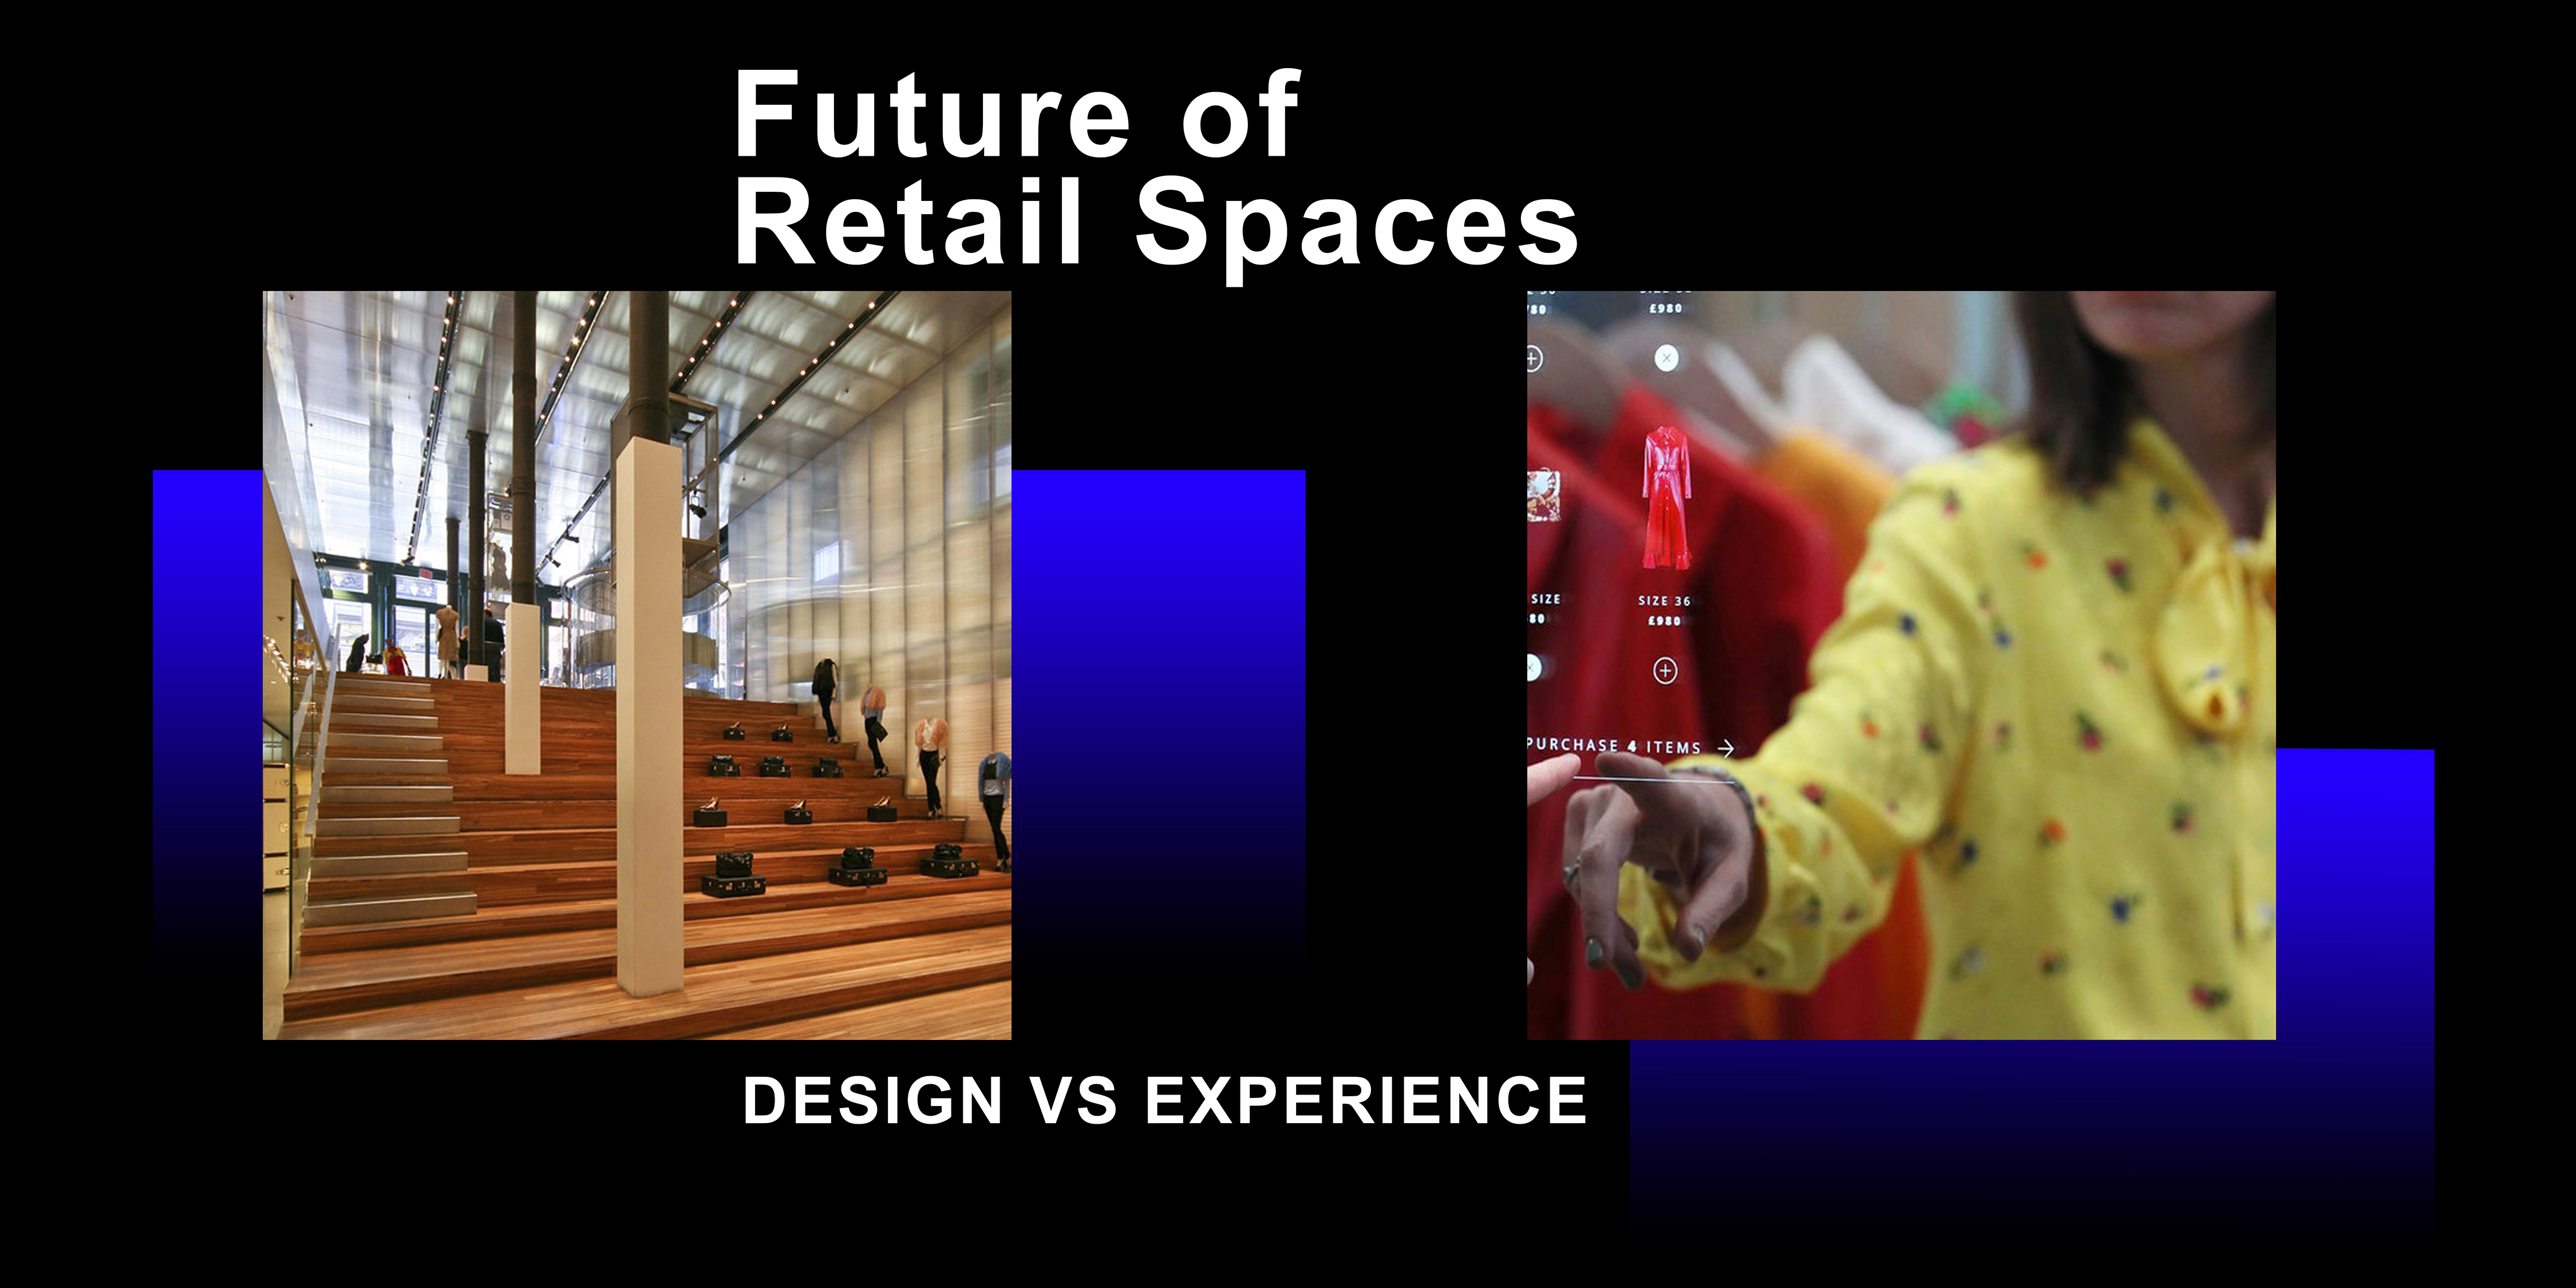  The Future of Retail Spaces